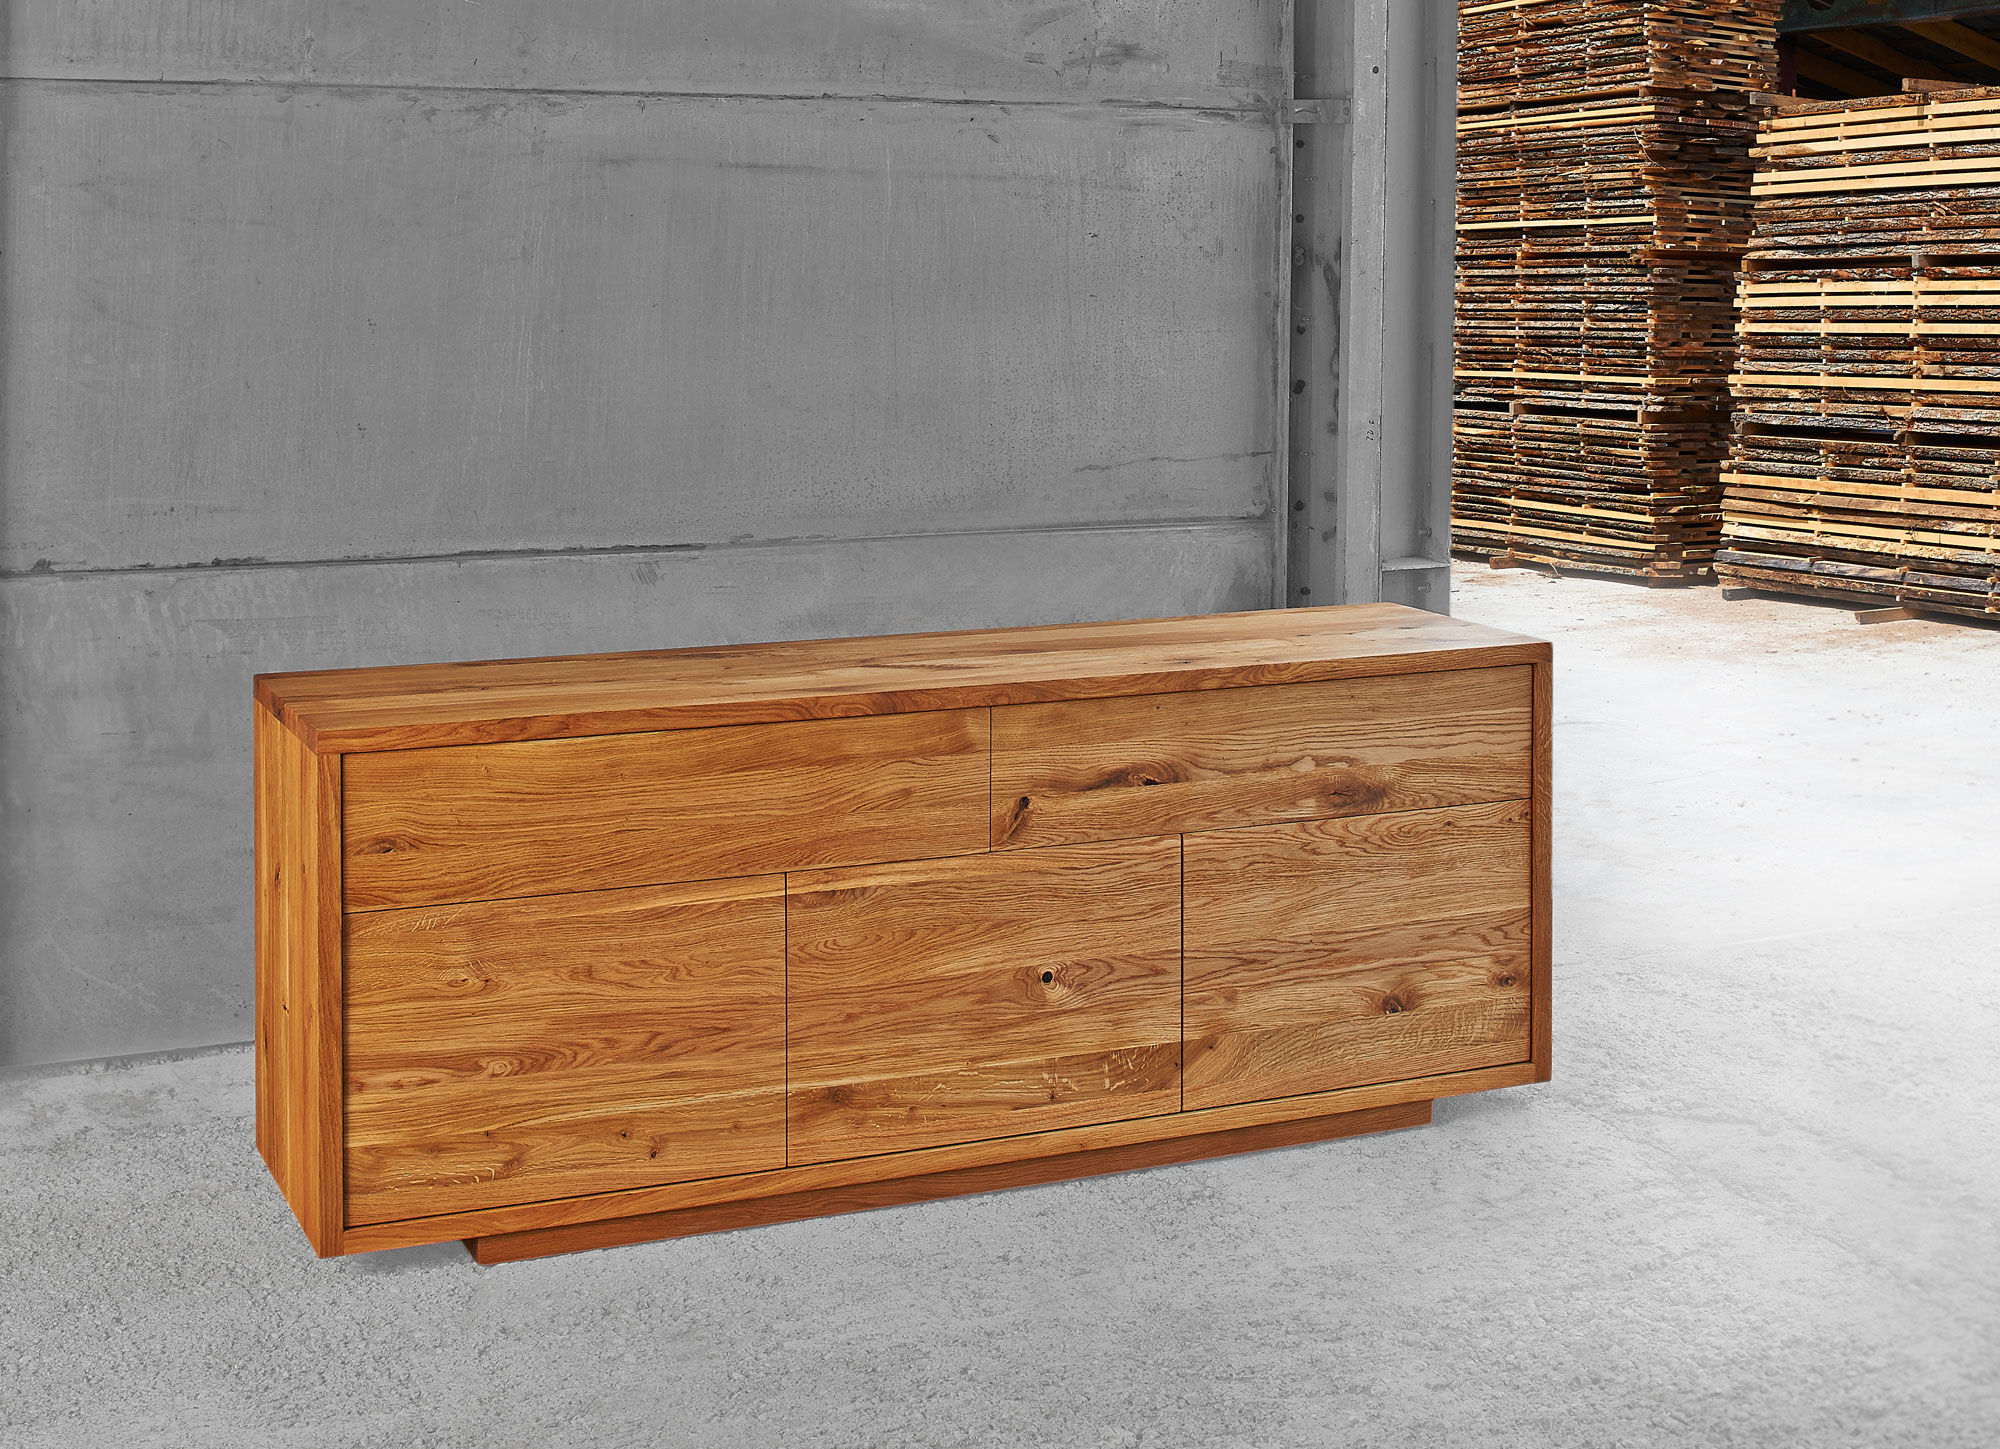 Wooden Designer Sideboard LINEA 0675a custom made in solid wood by vitamin design